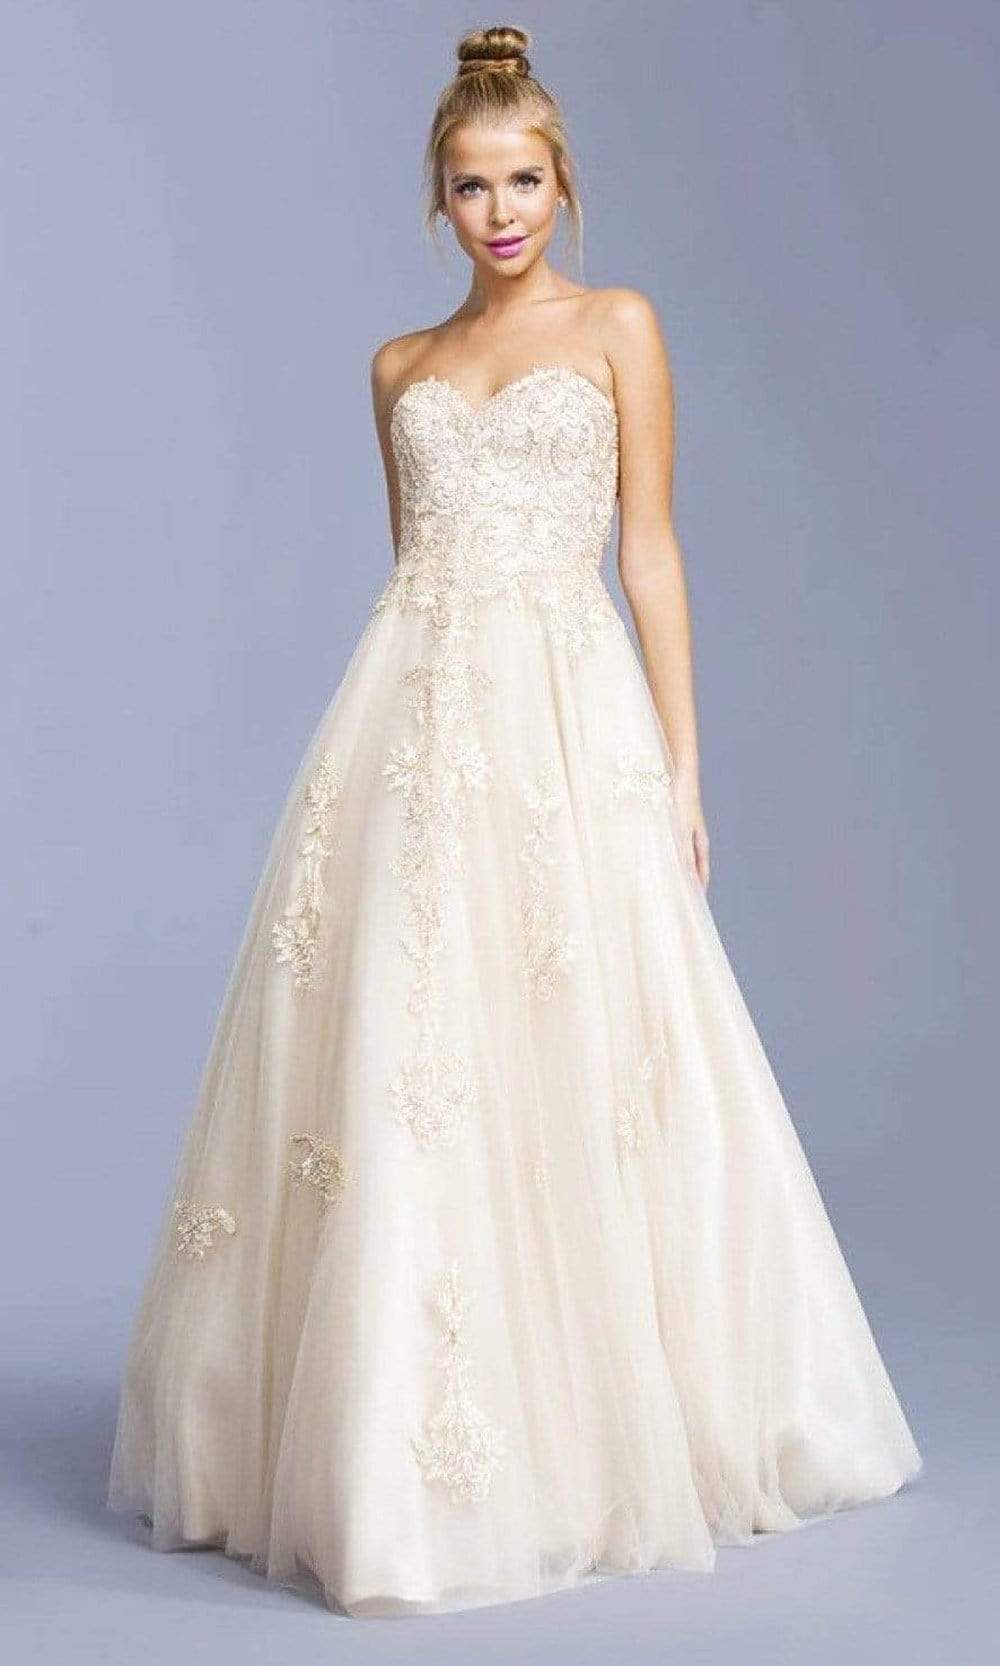 Image of Aspeed Design - L2038 Strapless Sweetheart Applique Ballgown